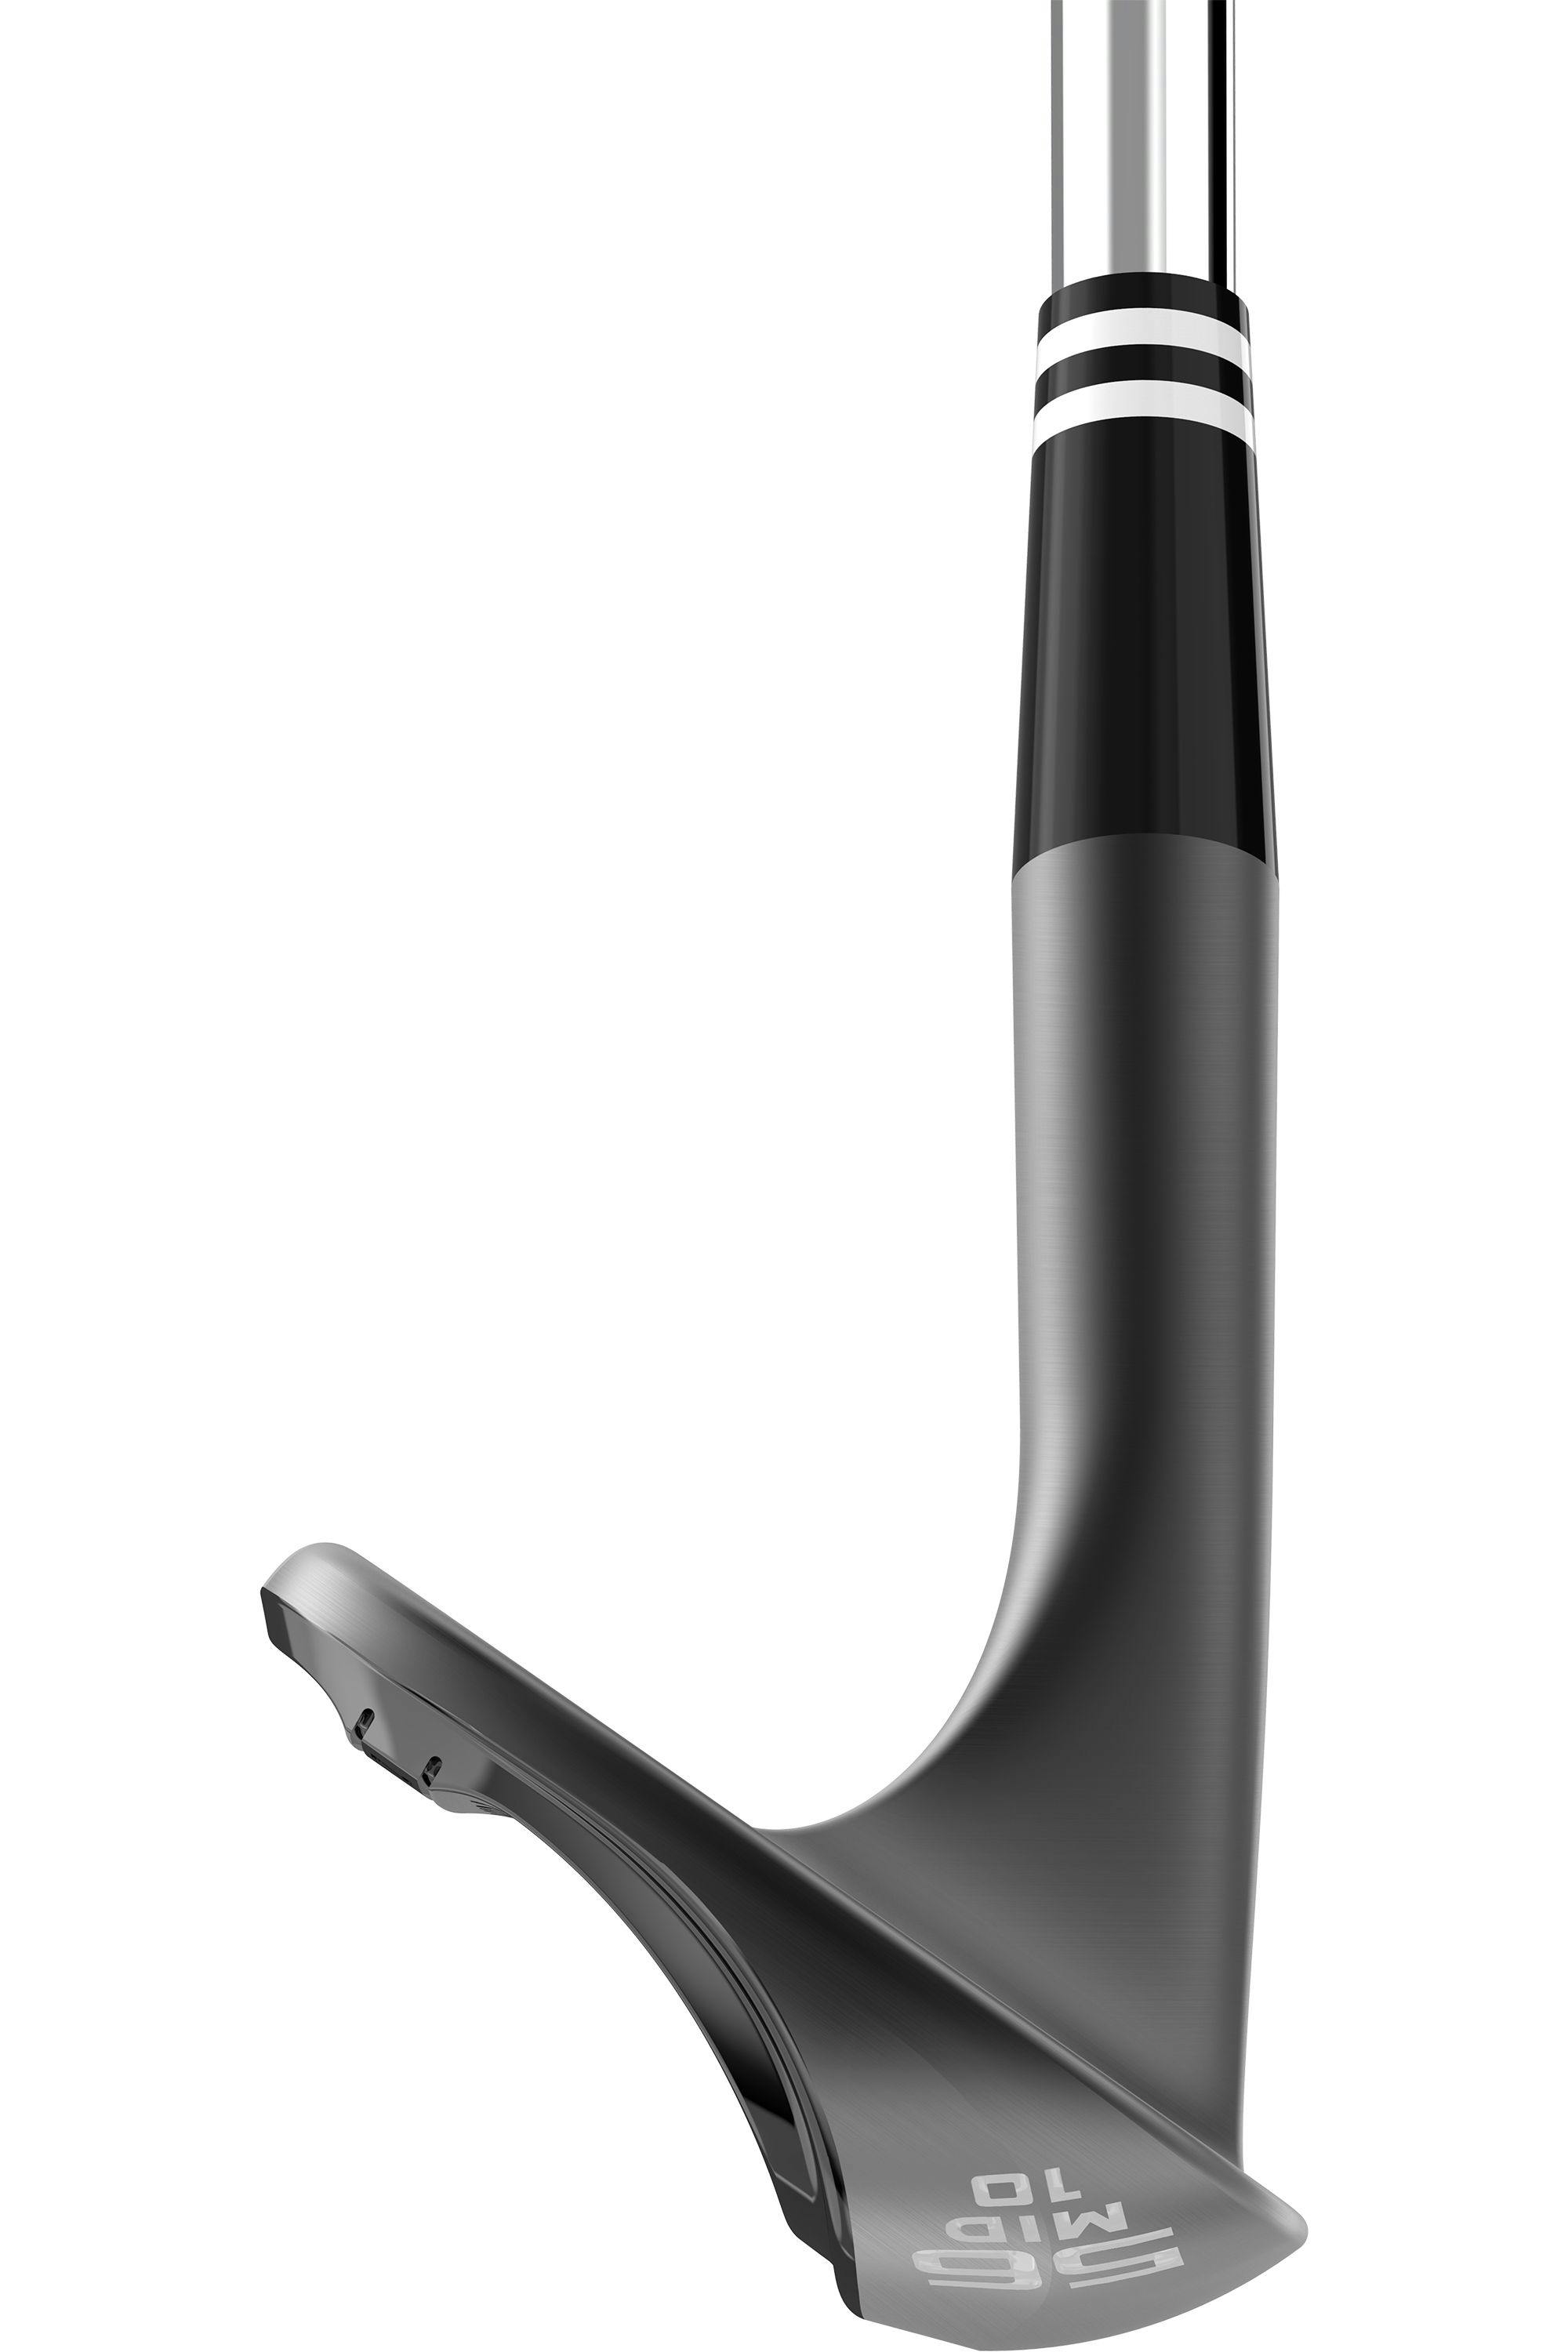 Cleveland RTX Zipcore Black Satin Wedge · Right handed · Steel · 56° · 10°